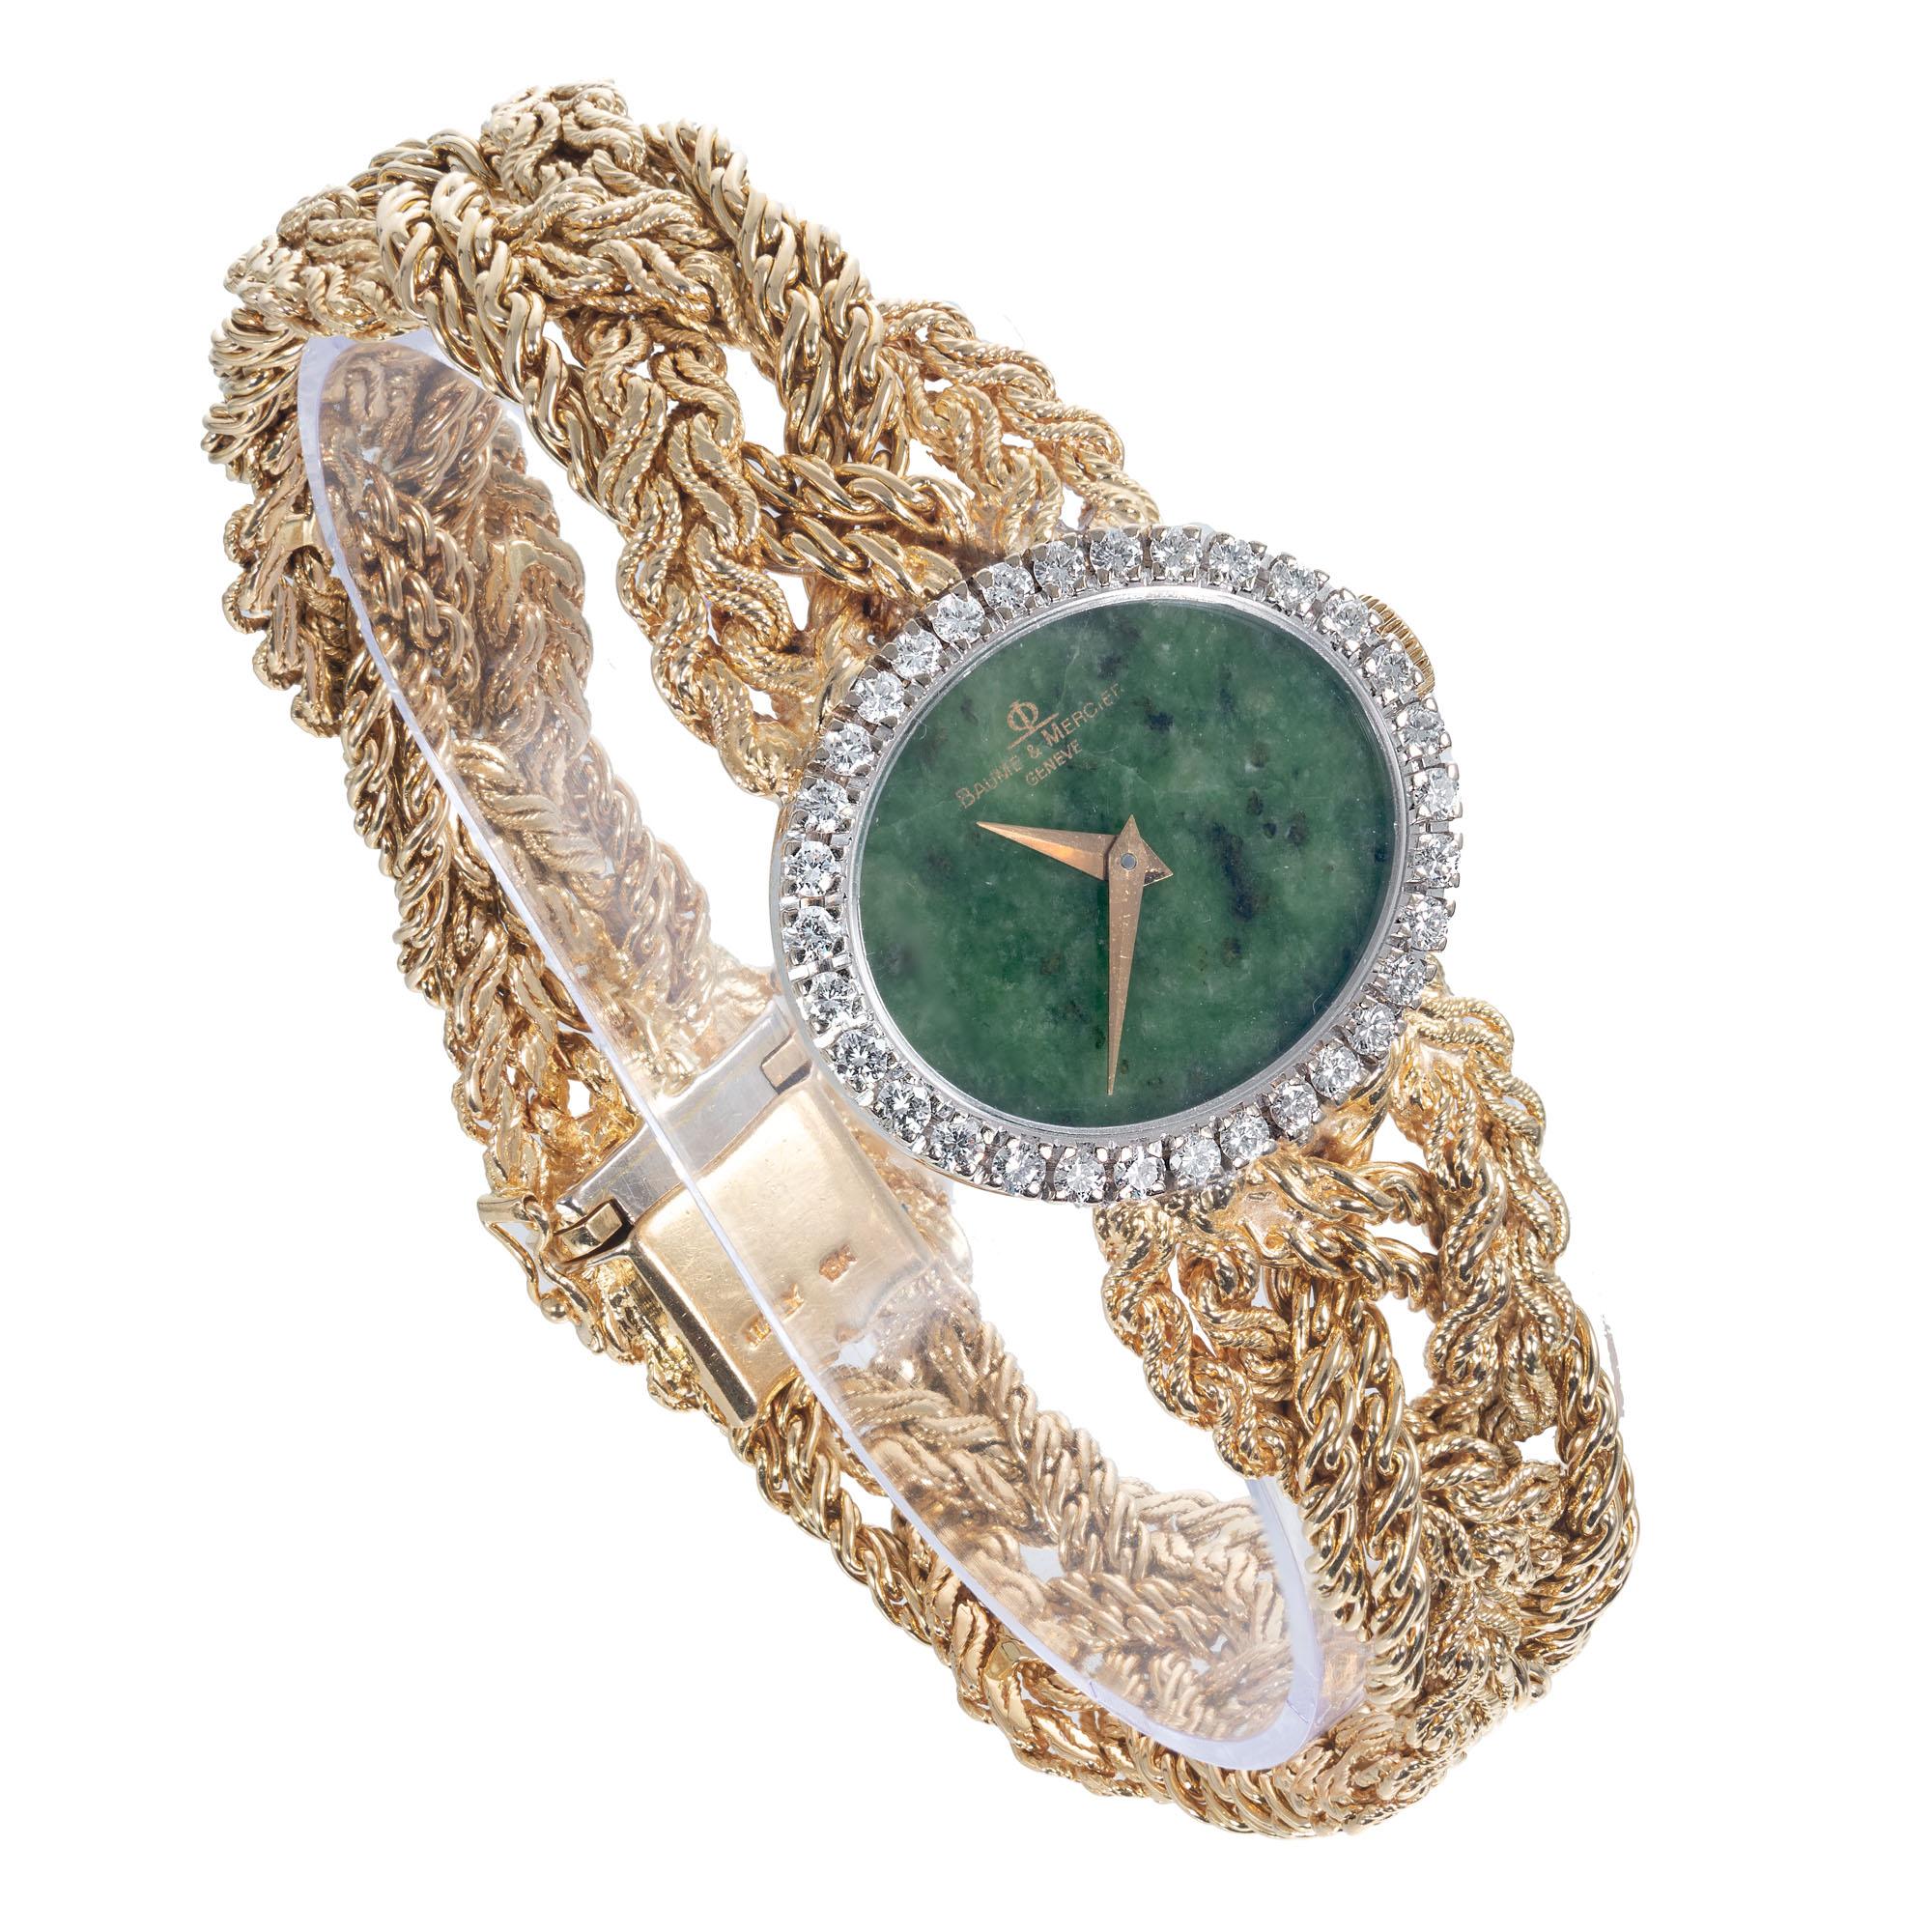 Haute Couture Baume & Mercier ladies wristwatch with a natural jade dial, diamond bezel and an 18k yellow gold case and braided band. Full original 7 ¾ Inch length. 

Approximately .75 carat diamonds F VS
Total weight 77.3 grams
Length: